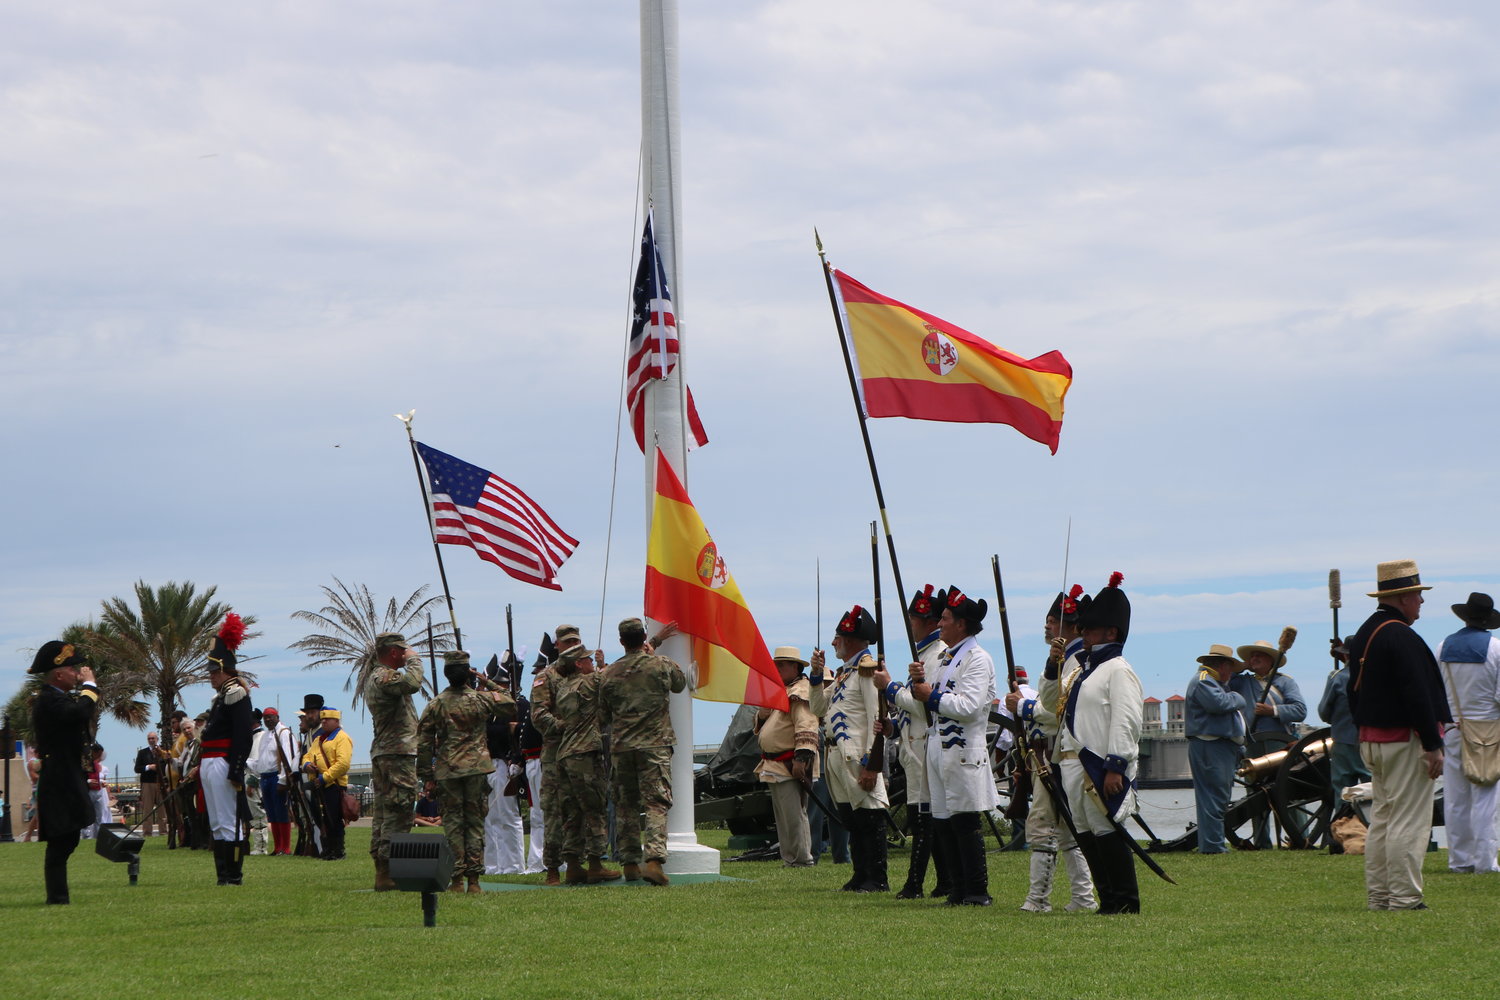 Members of the Florida National Guard lower the Spanish flag and raise the American flag to celebrate the 200th anniversary of Florida becoming a U.S. territory in St. Augustine on July 10.